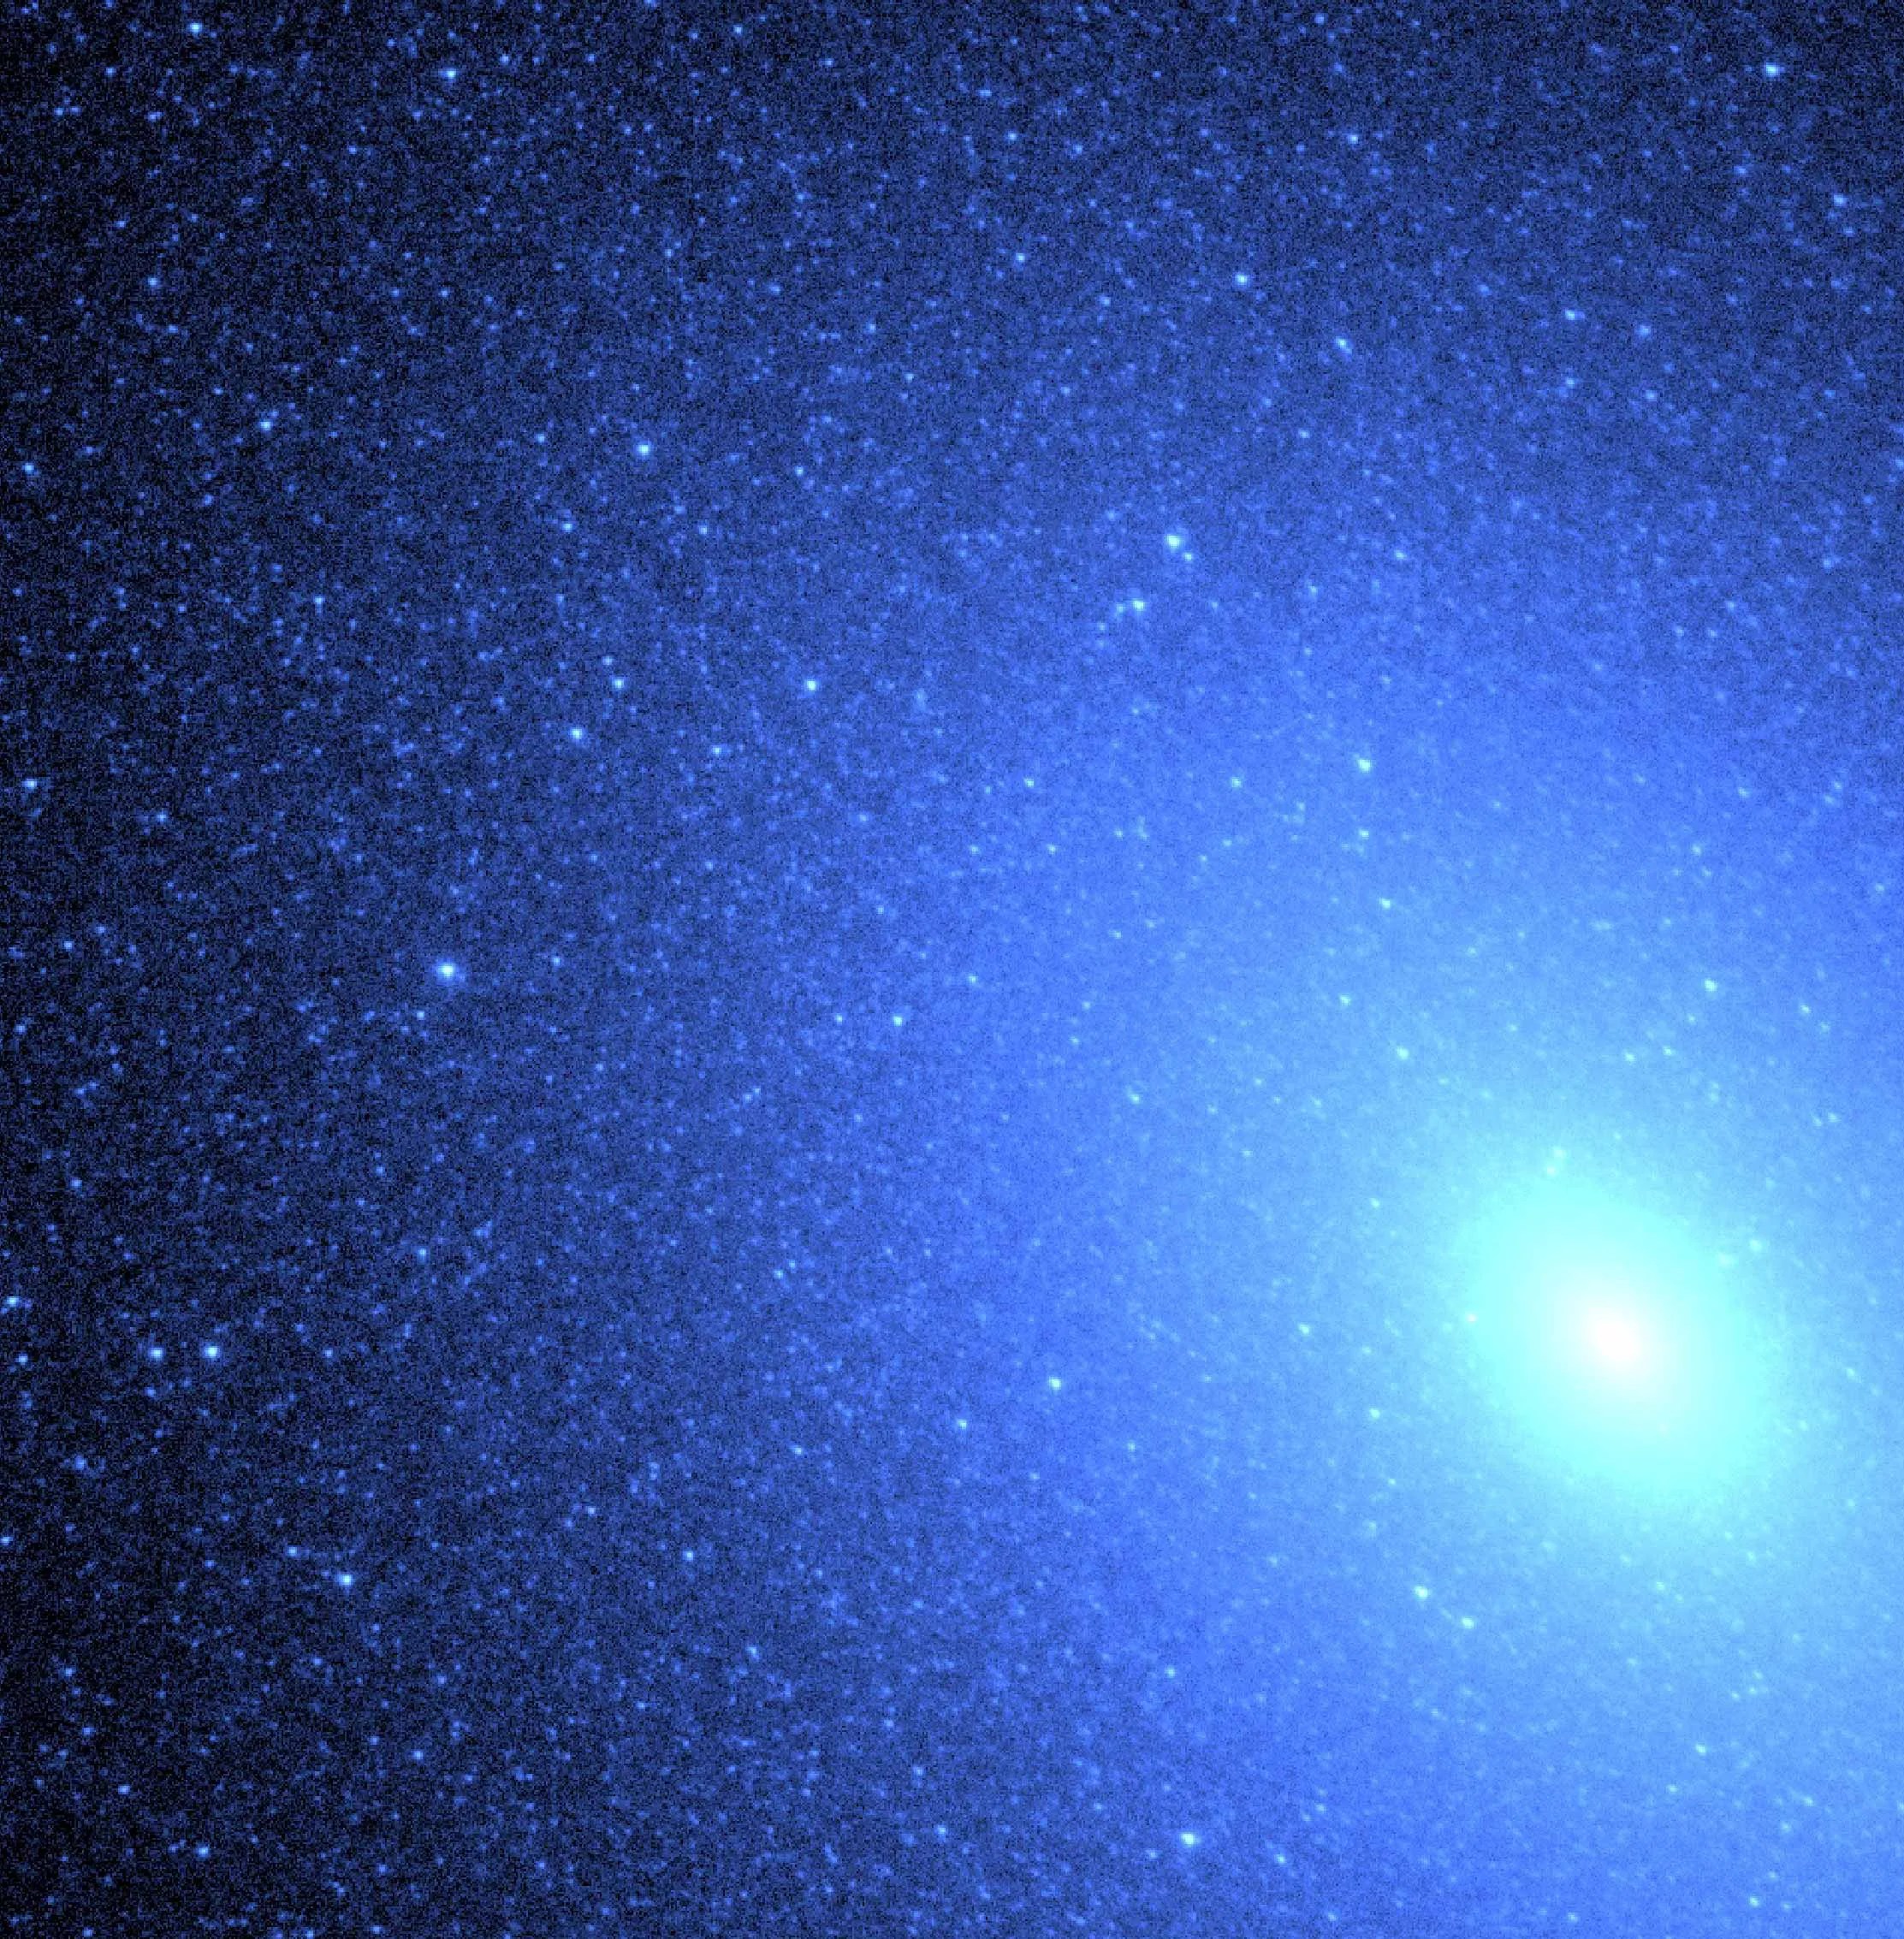 A bluish image of the core and surrounding of a companion galaxy to Andromeda. The color is due to the image being taken in ultraviolet light.